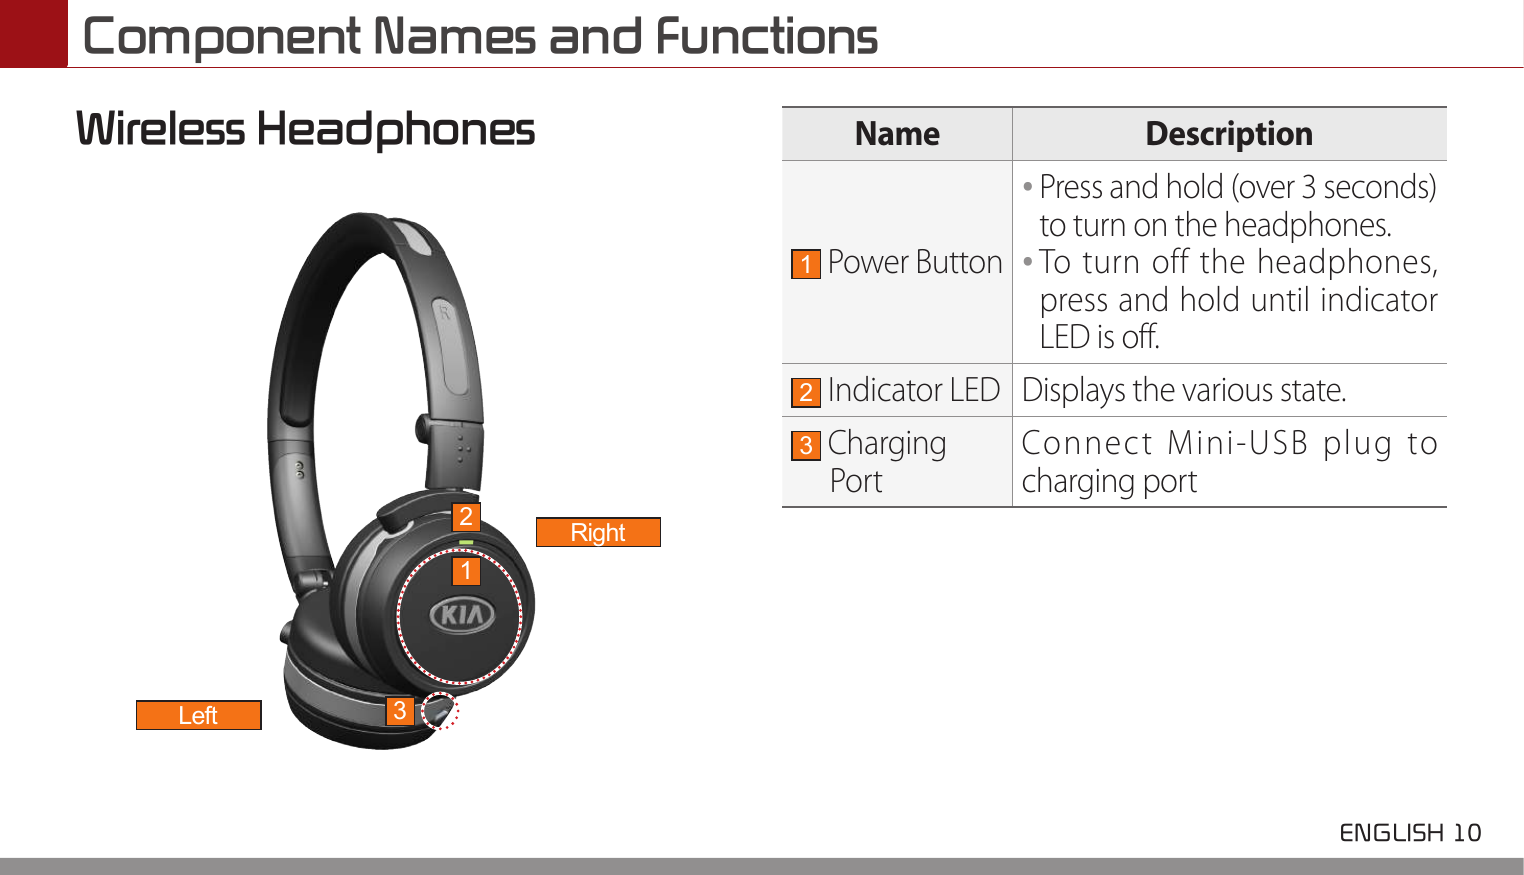 Component Names and Functions ENGLISH 10 Wireless Headphones Name Description1 Power Button••Press and hold (over 3 seconds) to turn on the headphones.••To turn off the headphones, press and hold until indicator LED is off.2 Indicator LED Displays the various state.3 Charging PortConnect Mini-USB plug to charging port12RightLeft 3